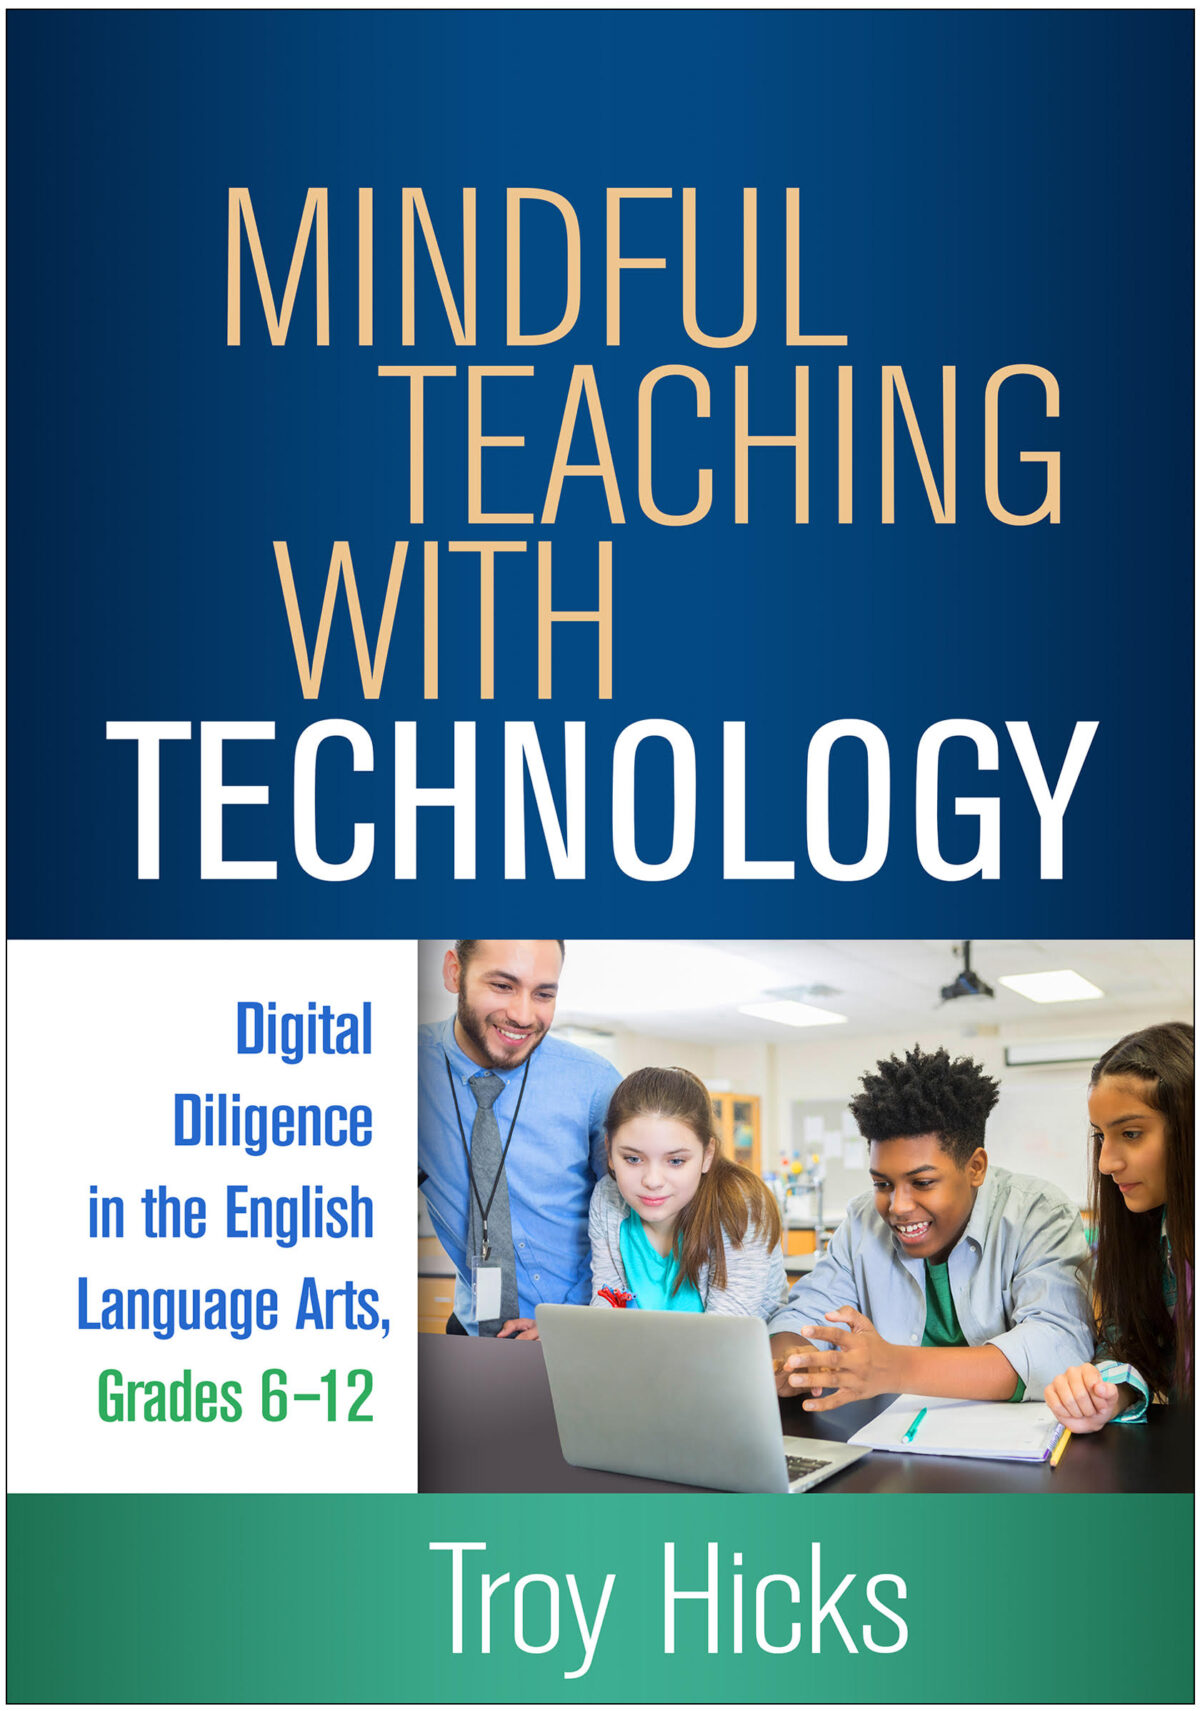 Announcing Mindful Teaching with Technology: Digital Diligence